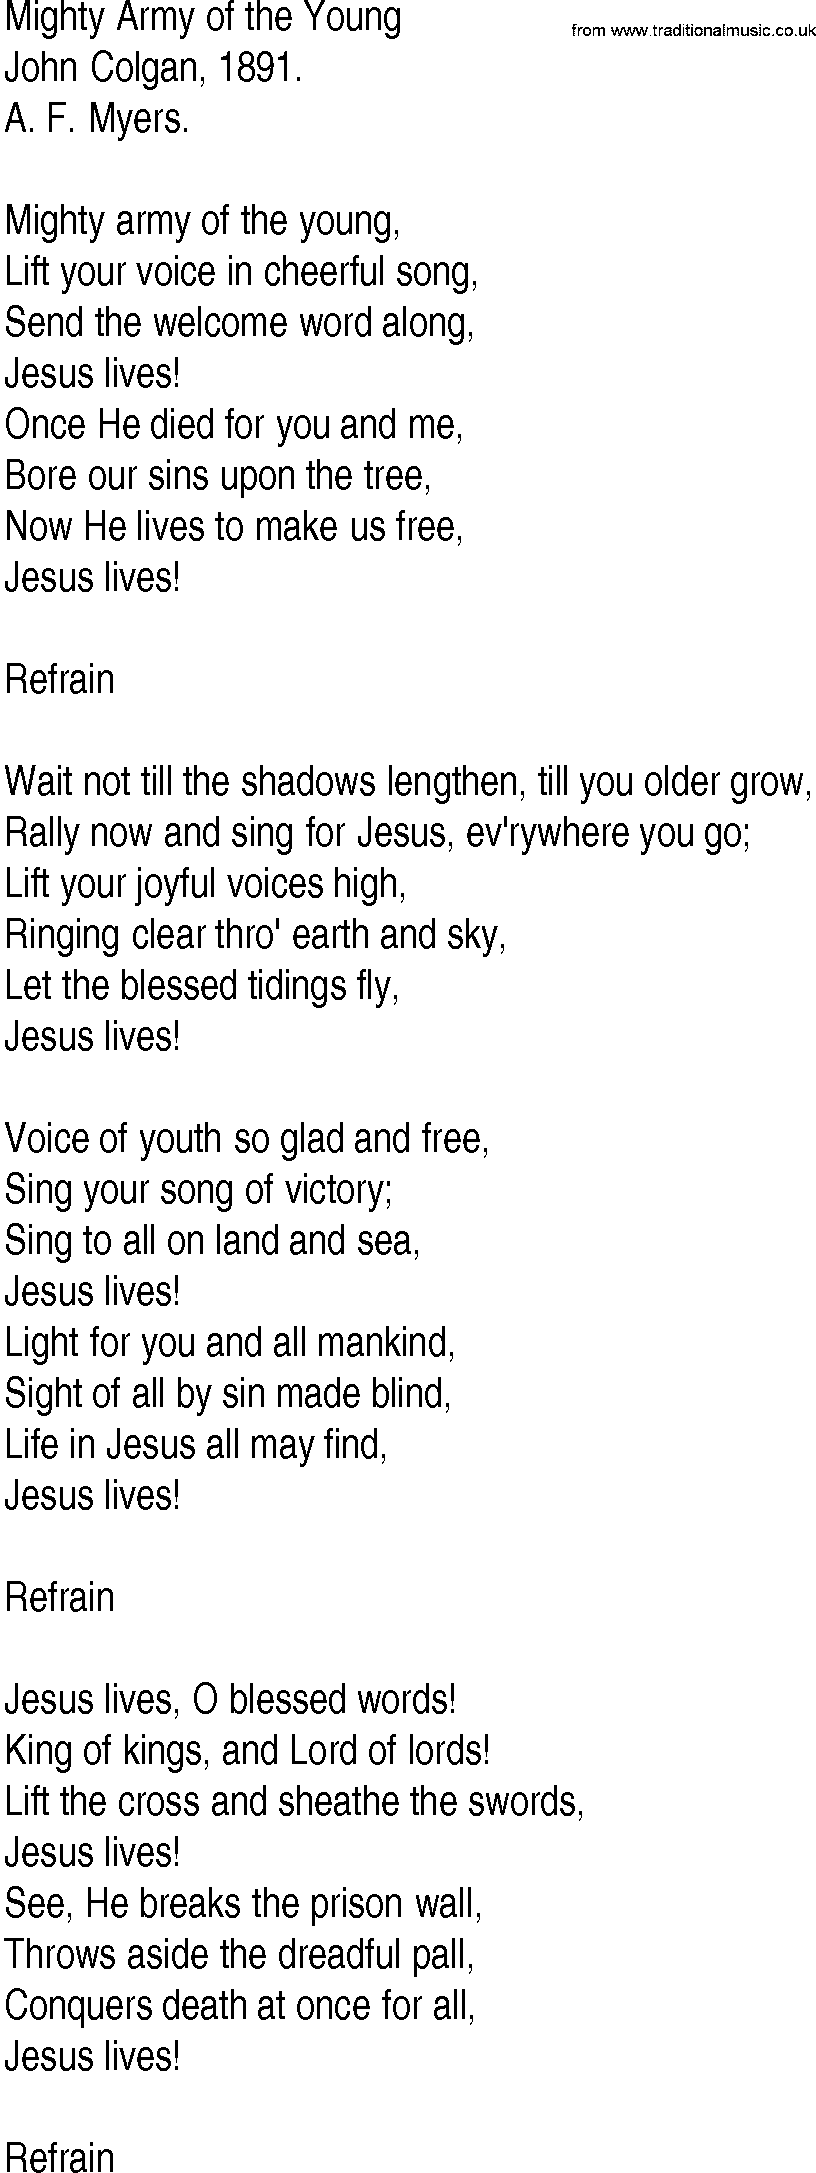 Hymn and Gospel Song: Mighty Army of the Young by John Colgan lyrics